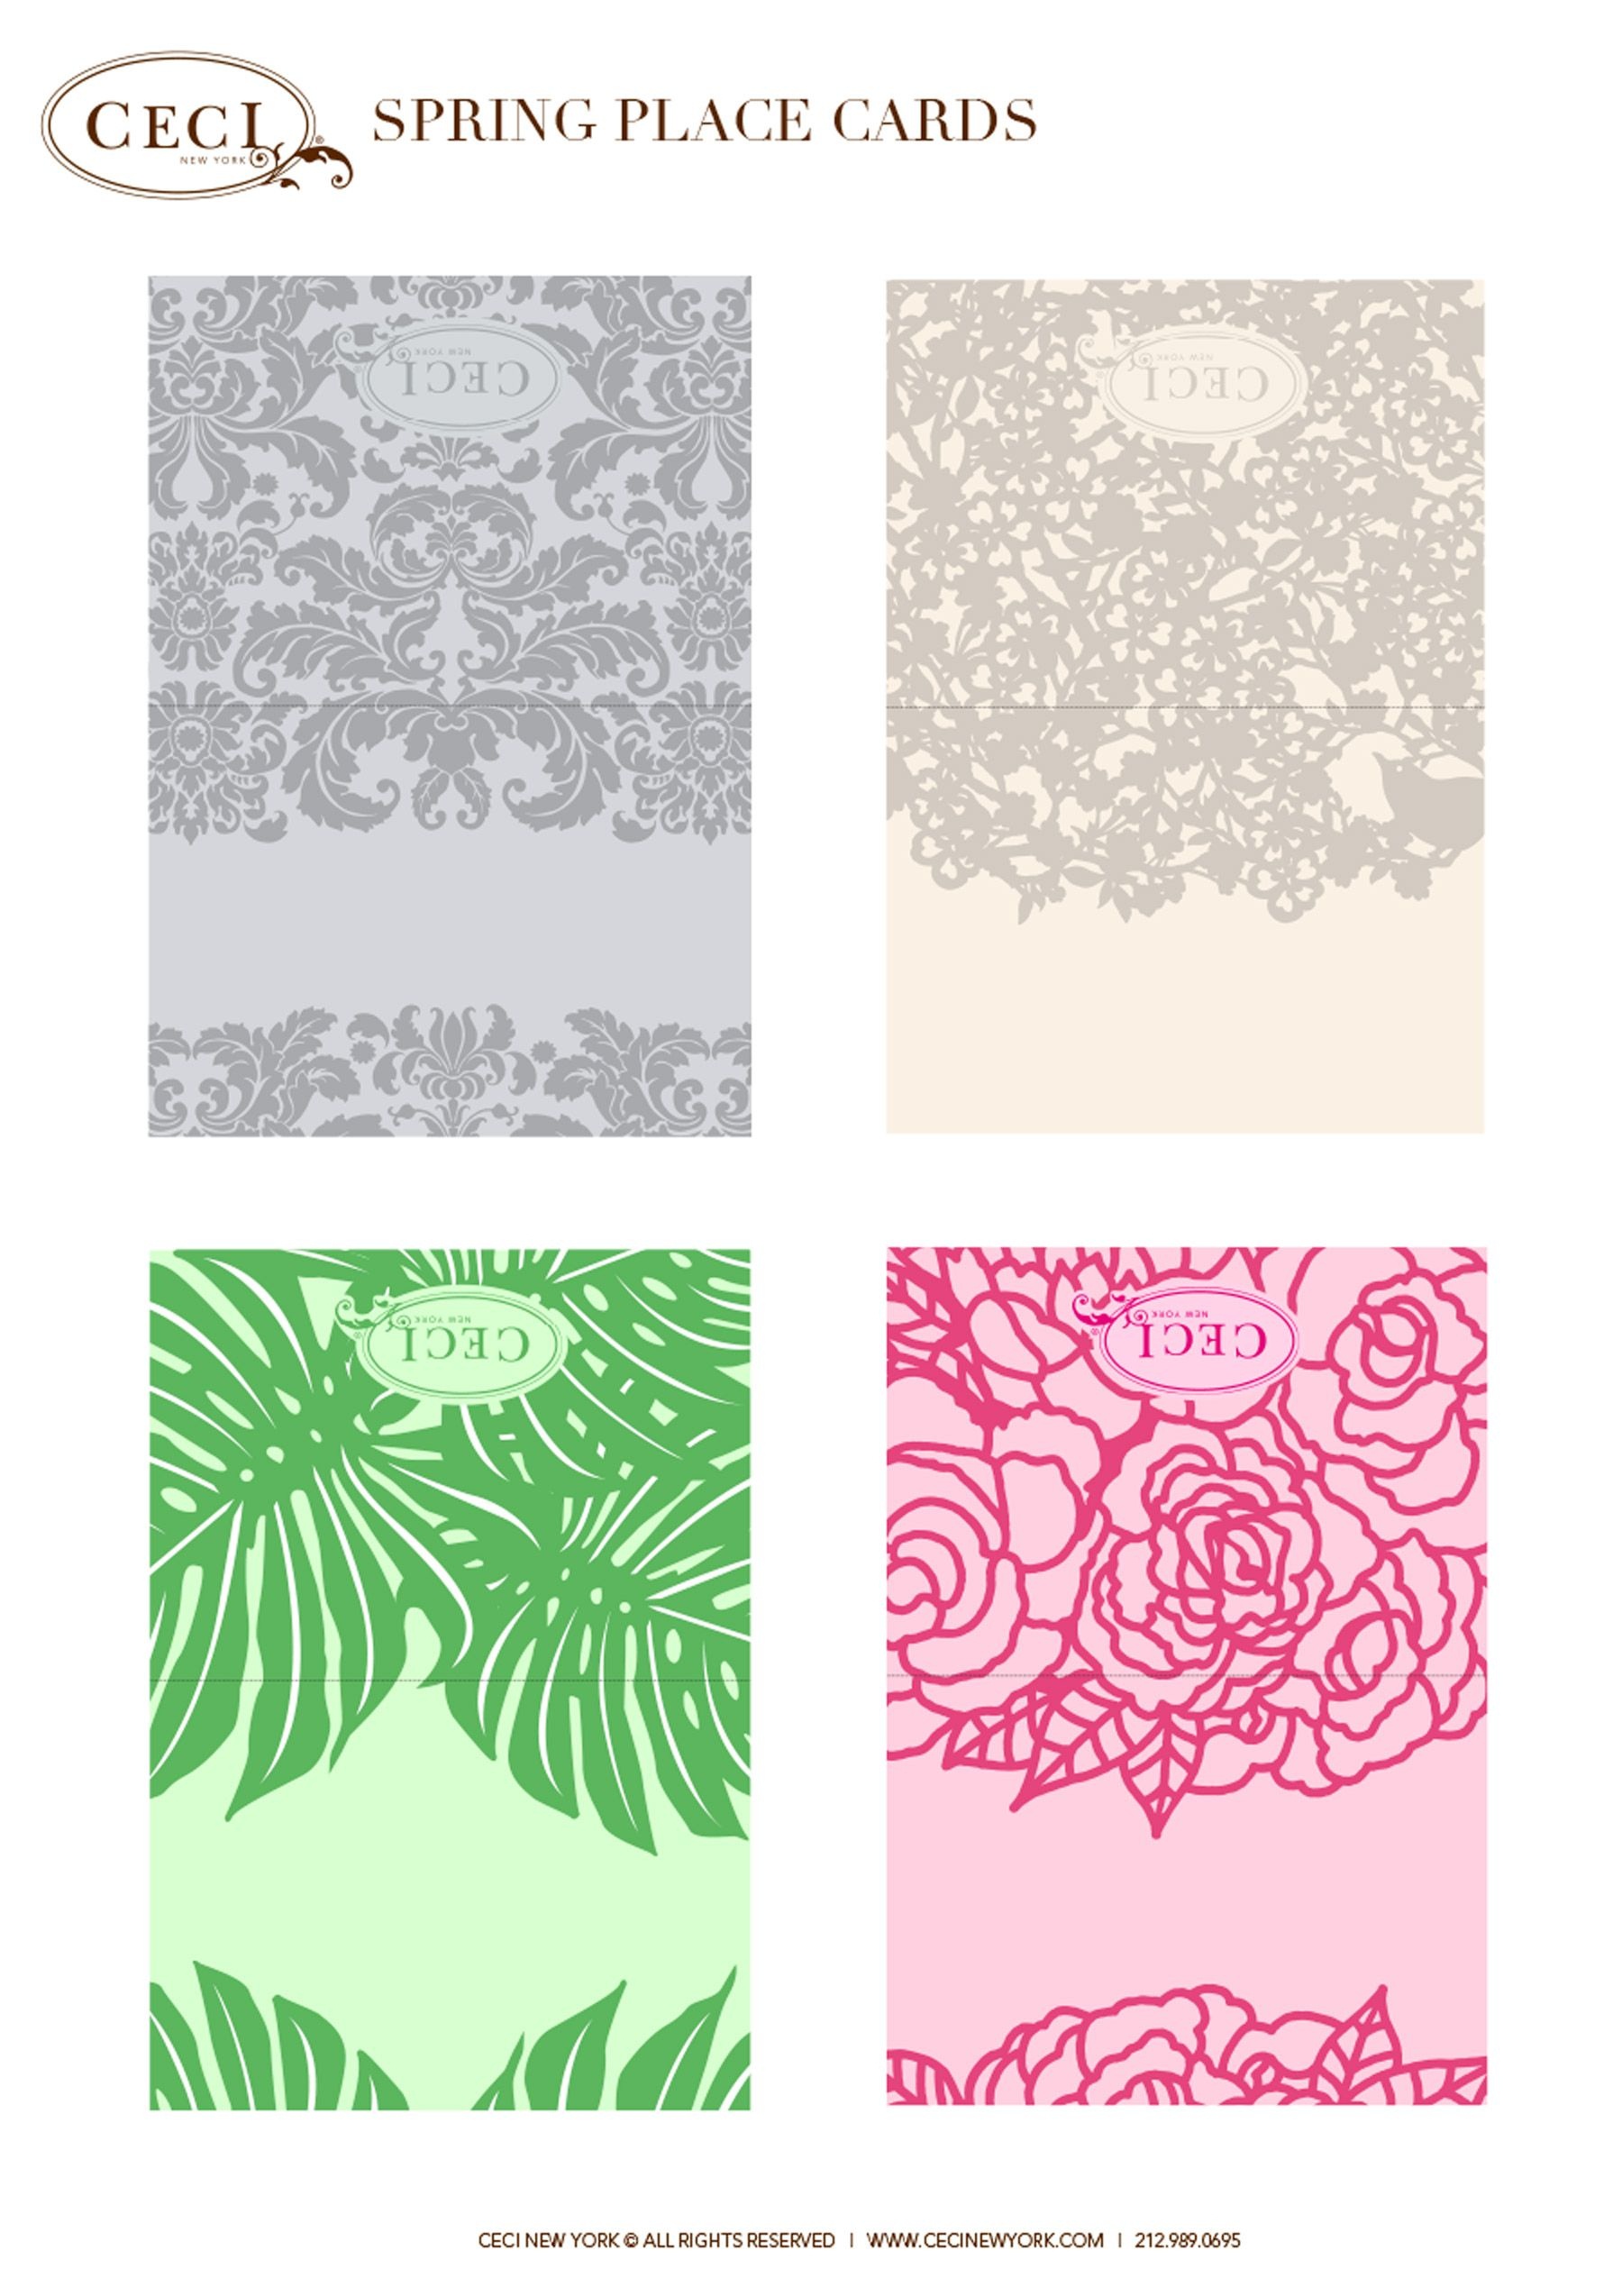 Cecistyle - Make This! - Ceci New York Spring Place Cards. #template - Free Printable Damask Place Cards